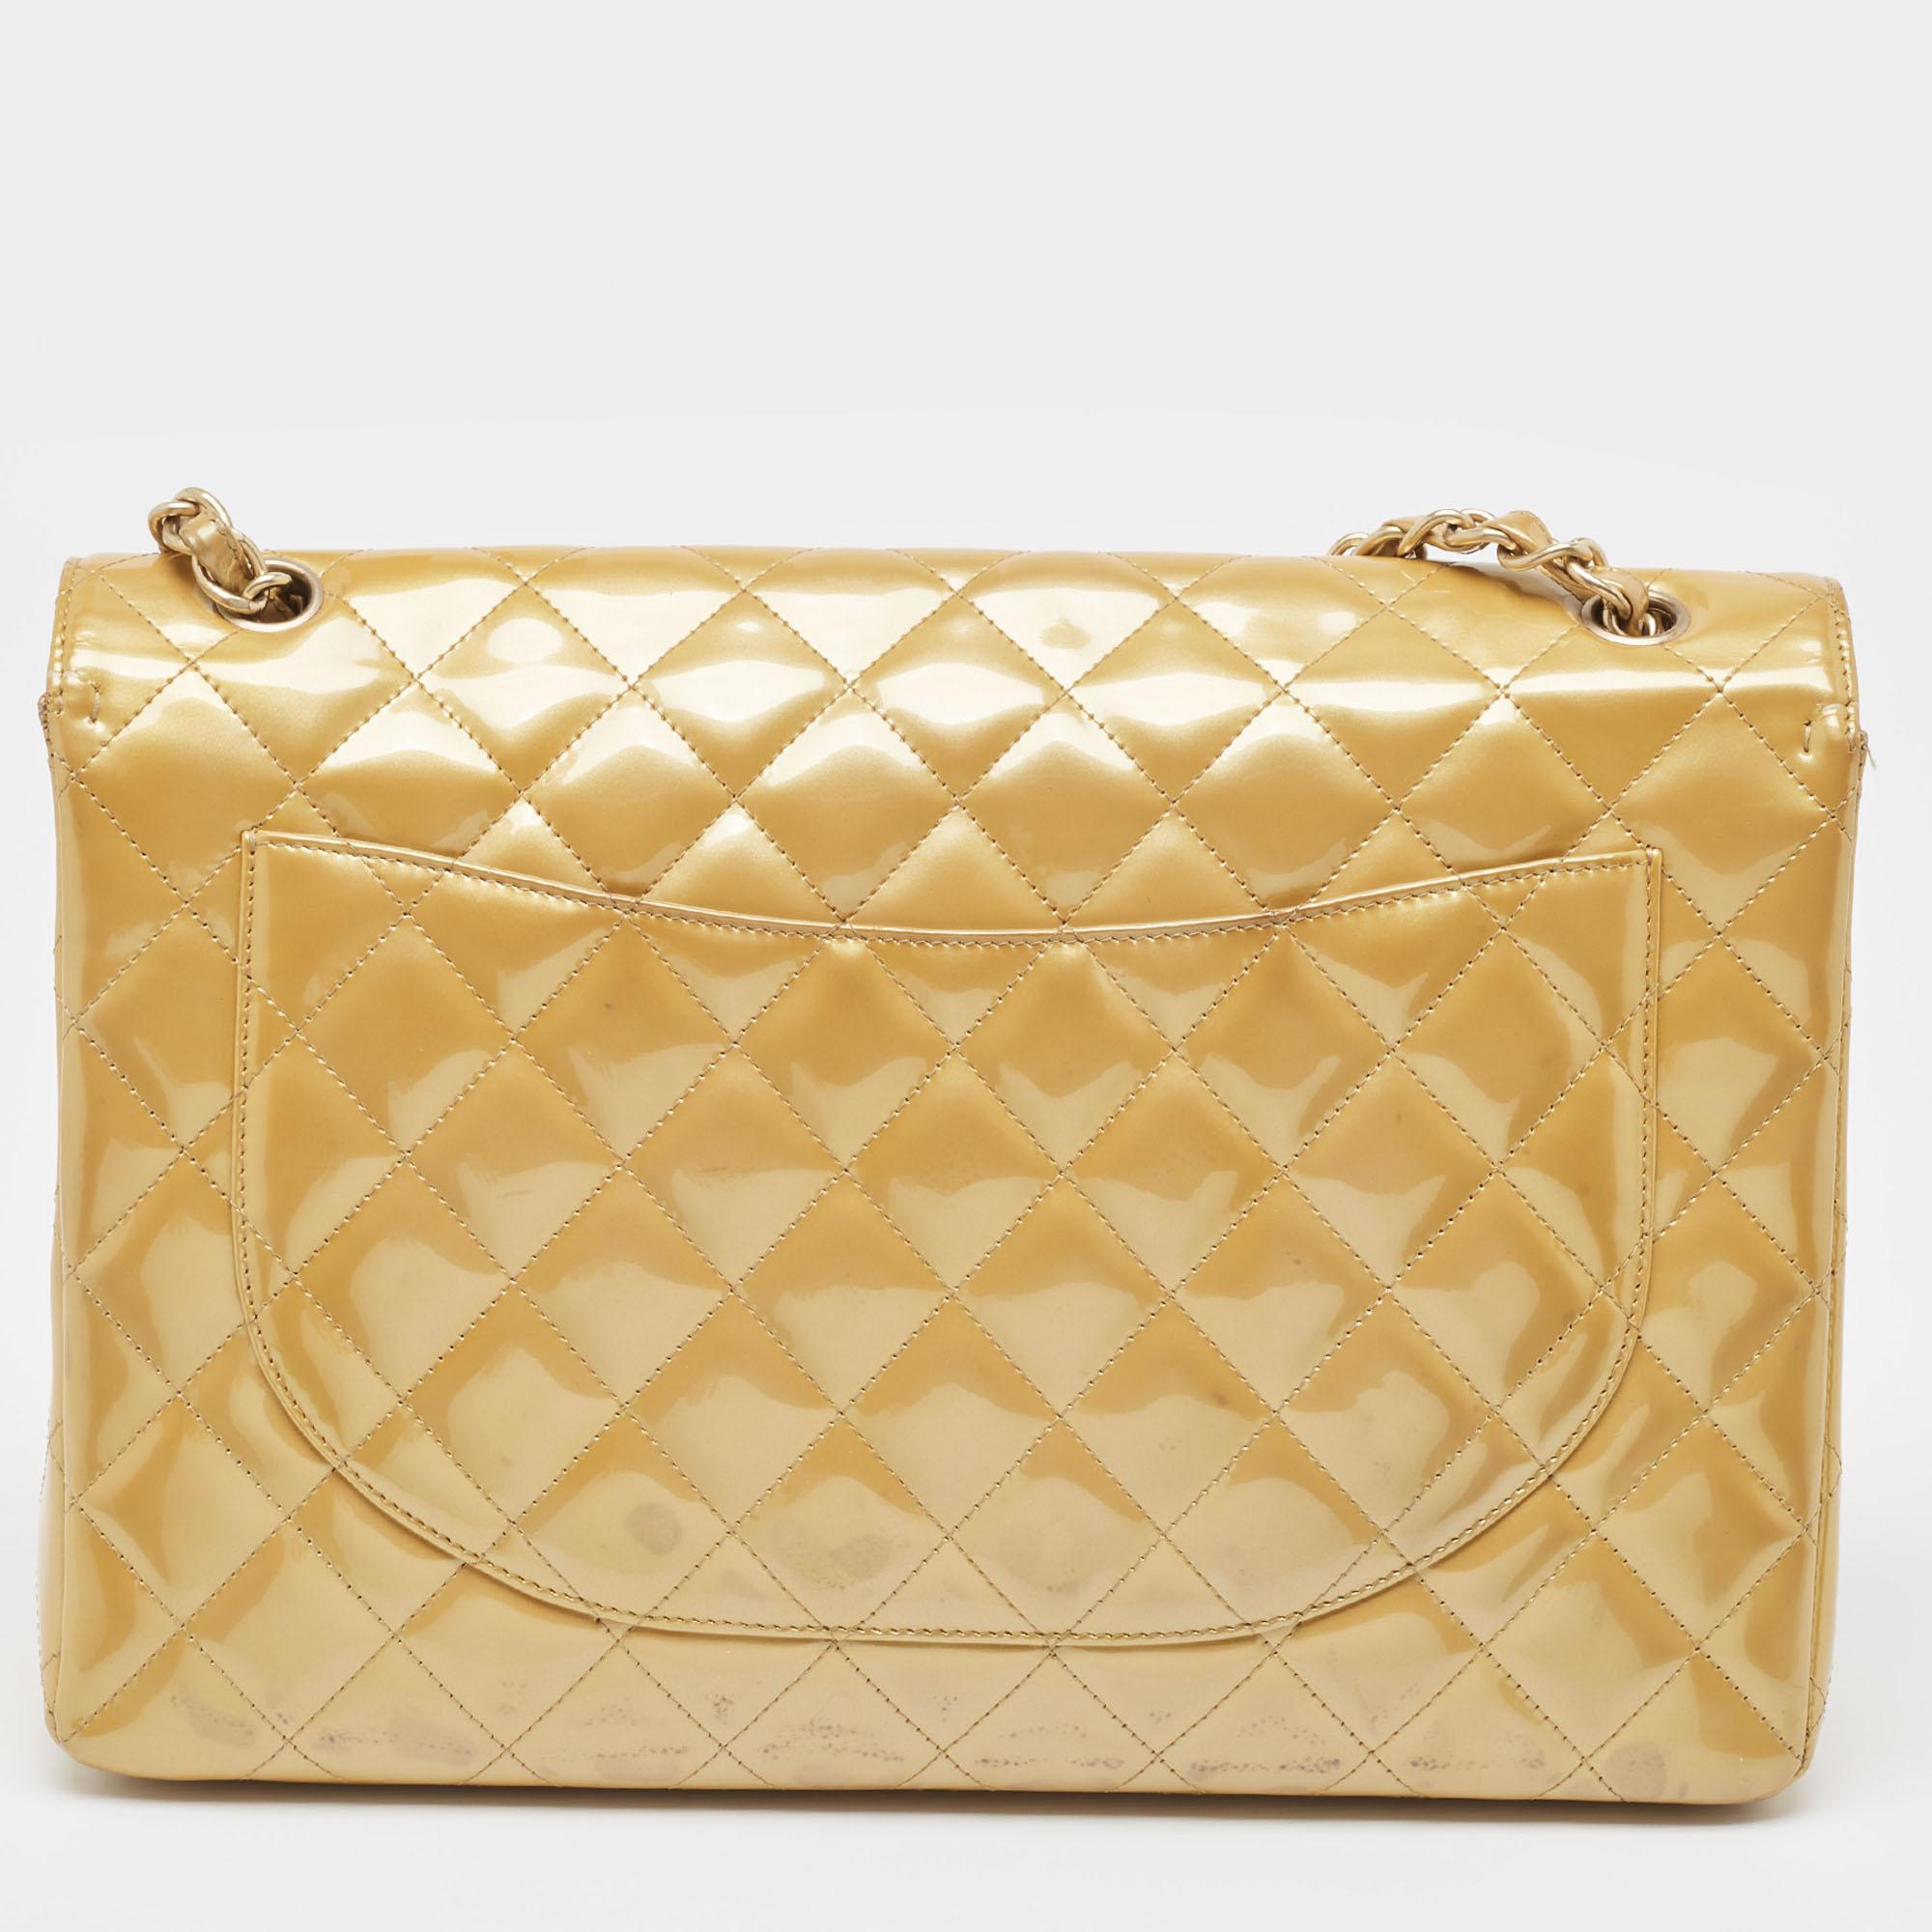 Chanel Cream Quilted Patent Leather Maxi Classic Single Flap Bag For Sale 9